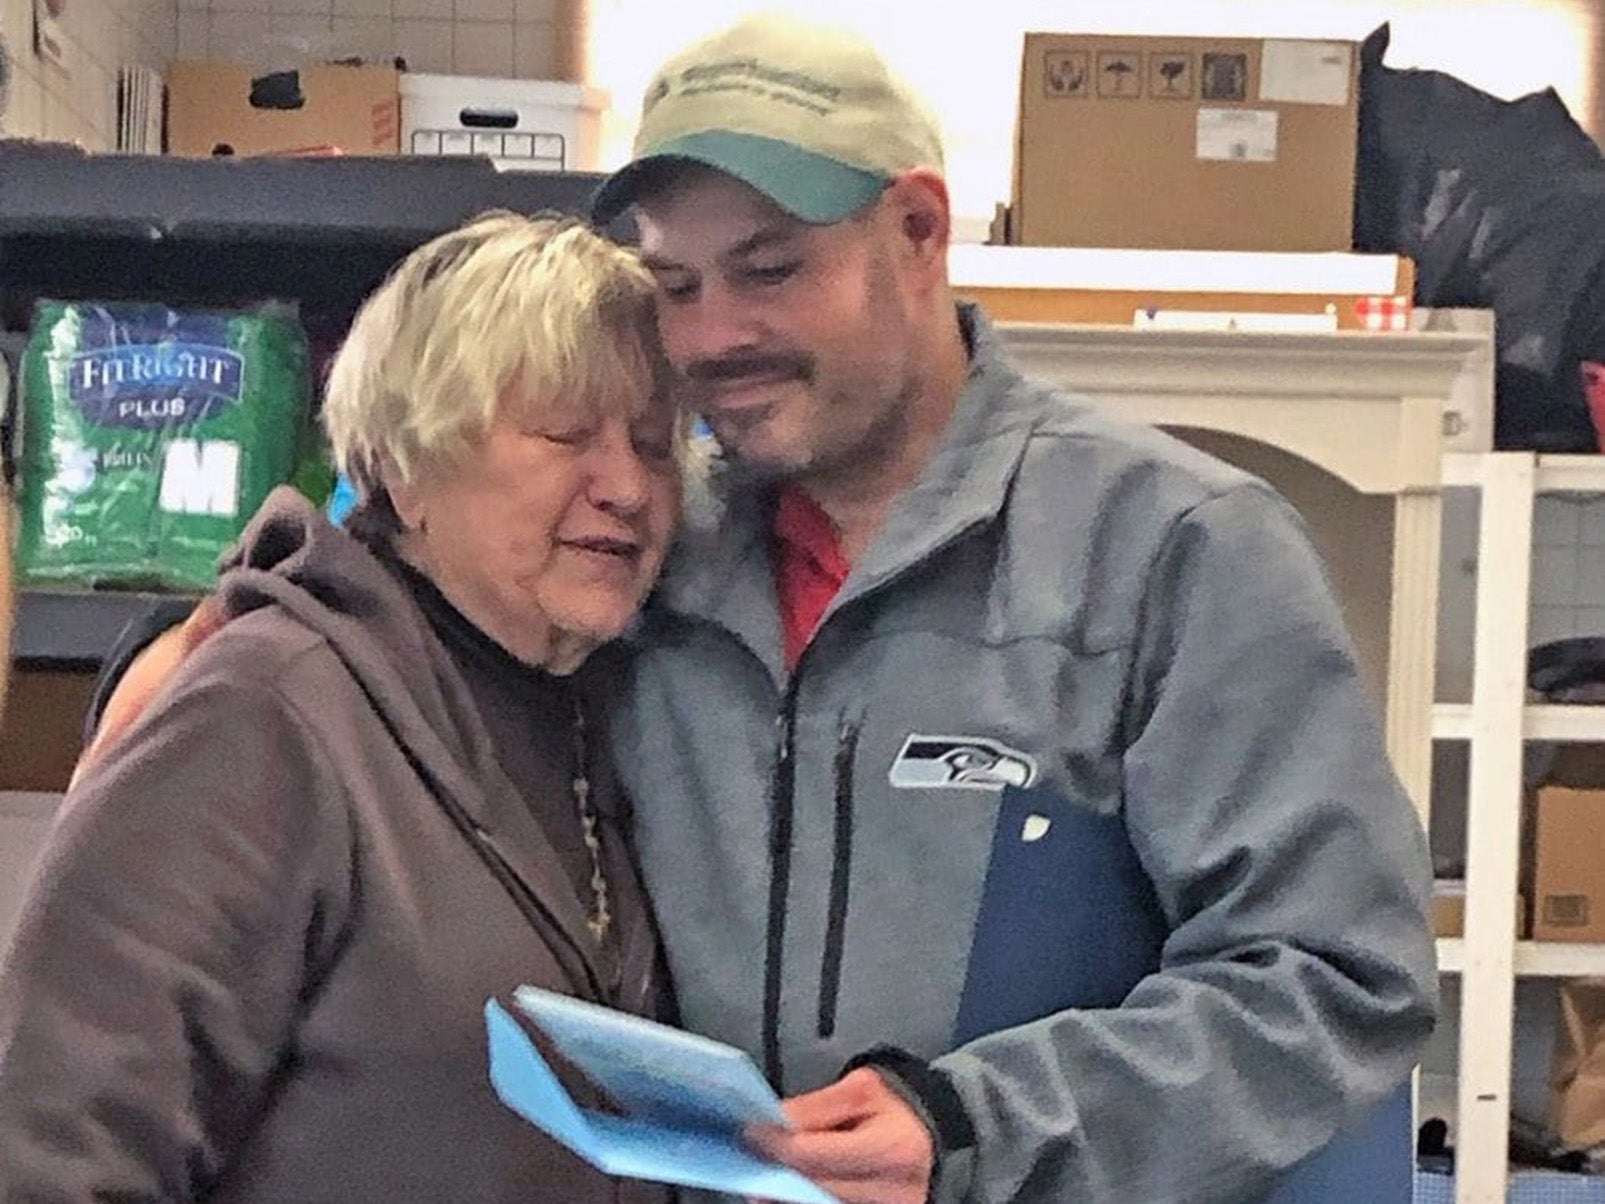 Kevin Booth with Sumner Community Food Bank director Anita Miller, who gave him a thank-you note and gift card as a reward for turning in $17,000